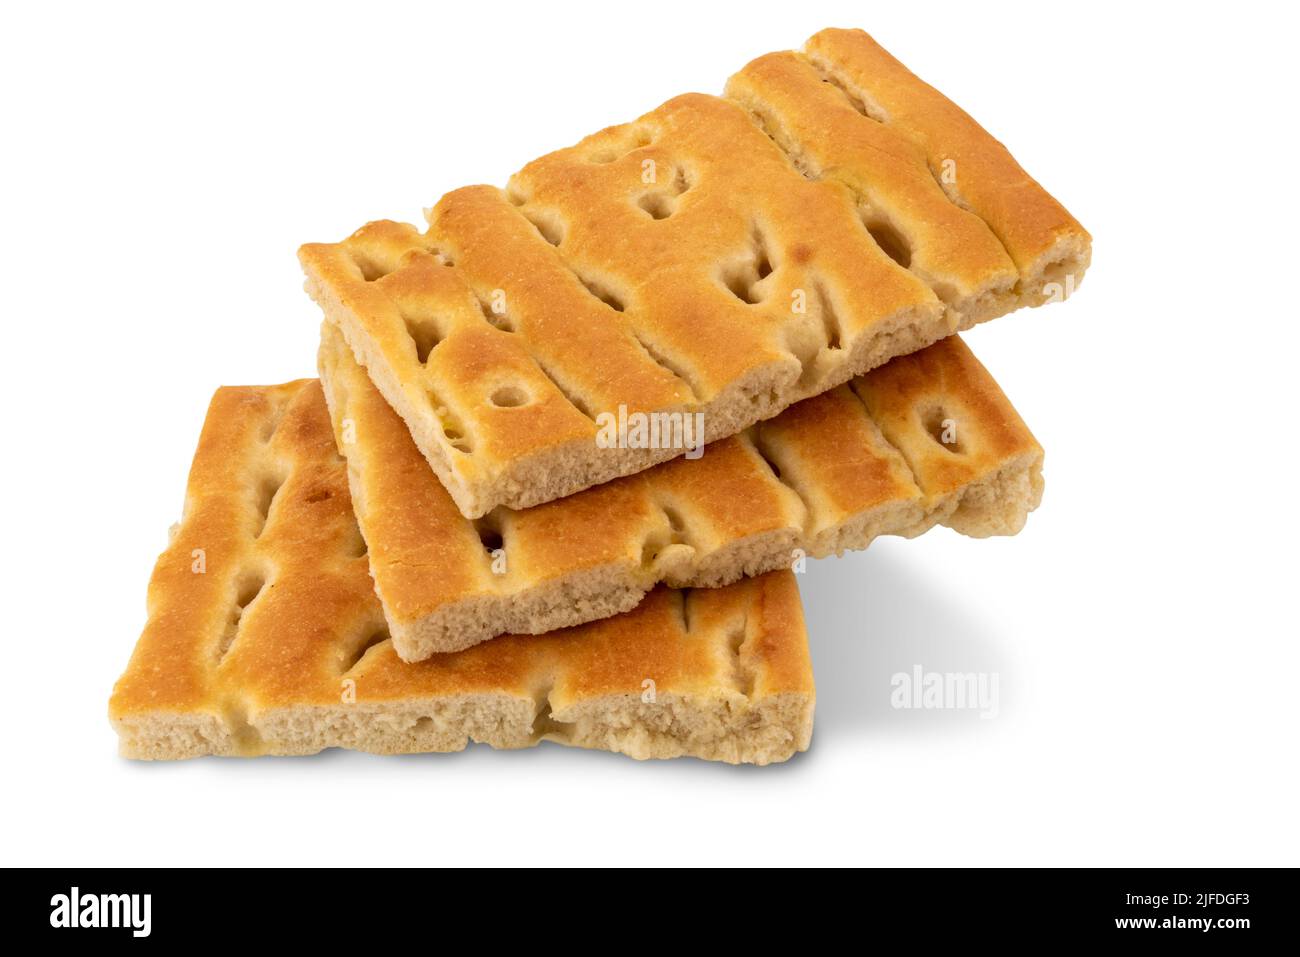 Focaccia bread ligurian tipical of Genova - bread of sourdough and olive oil - stack of three slices isolated on white, clipping path included Stock Photo